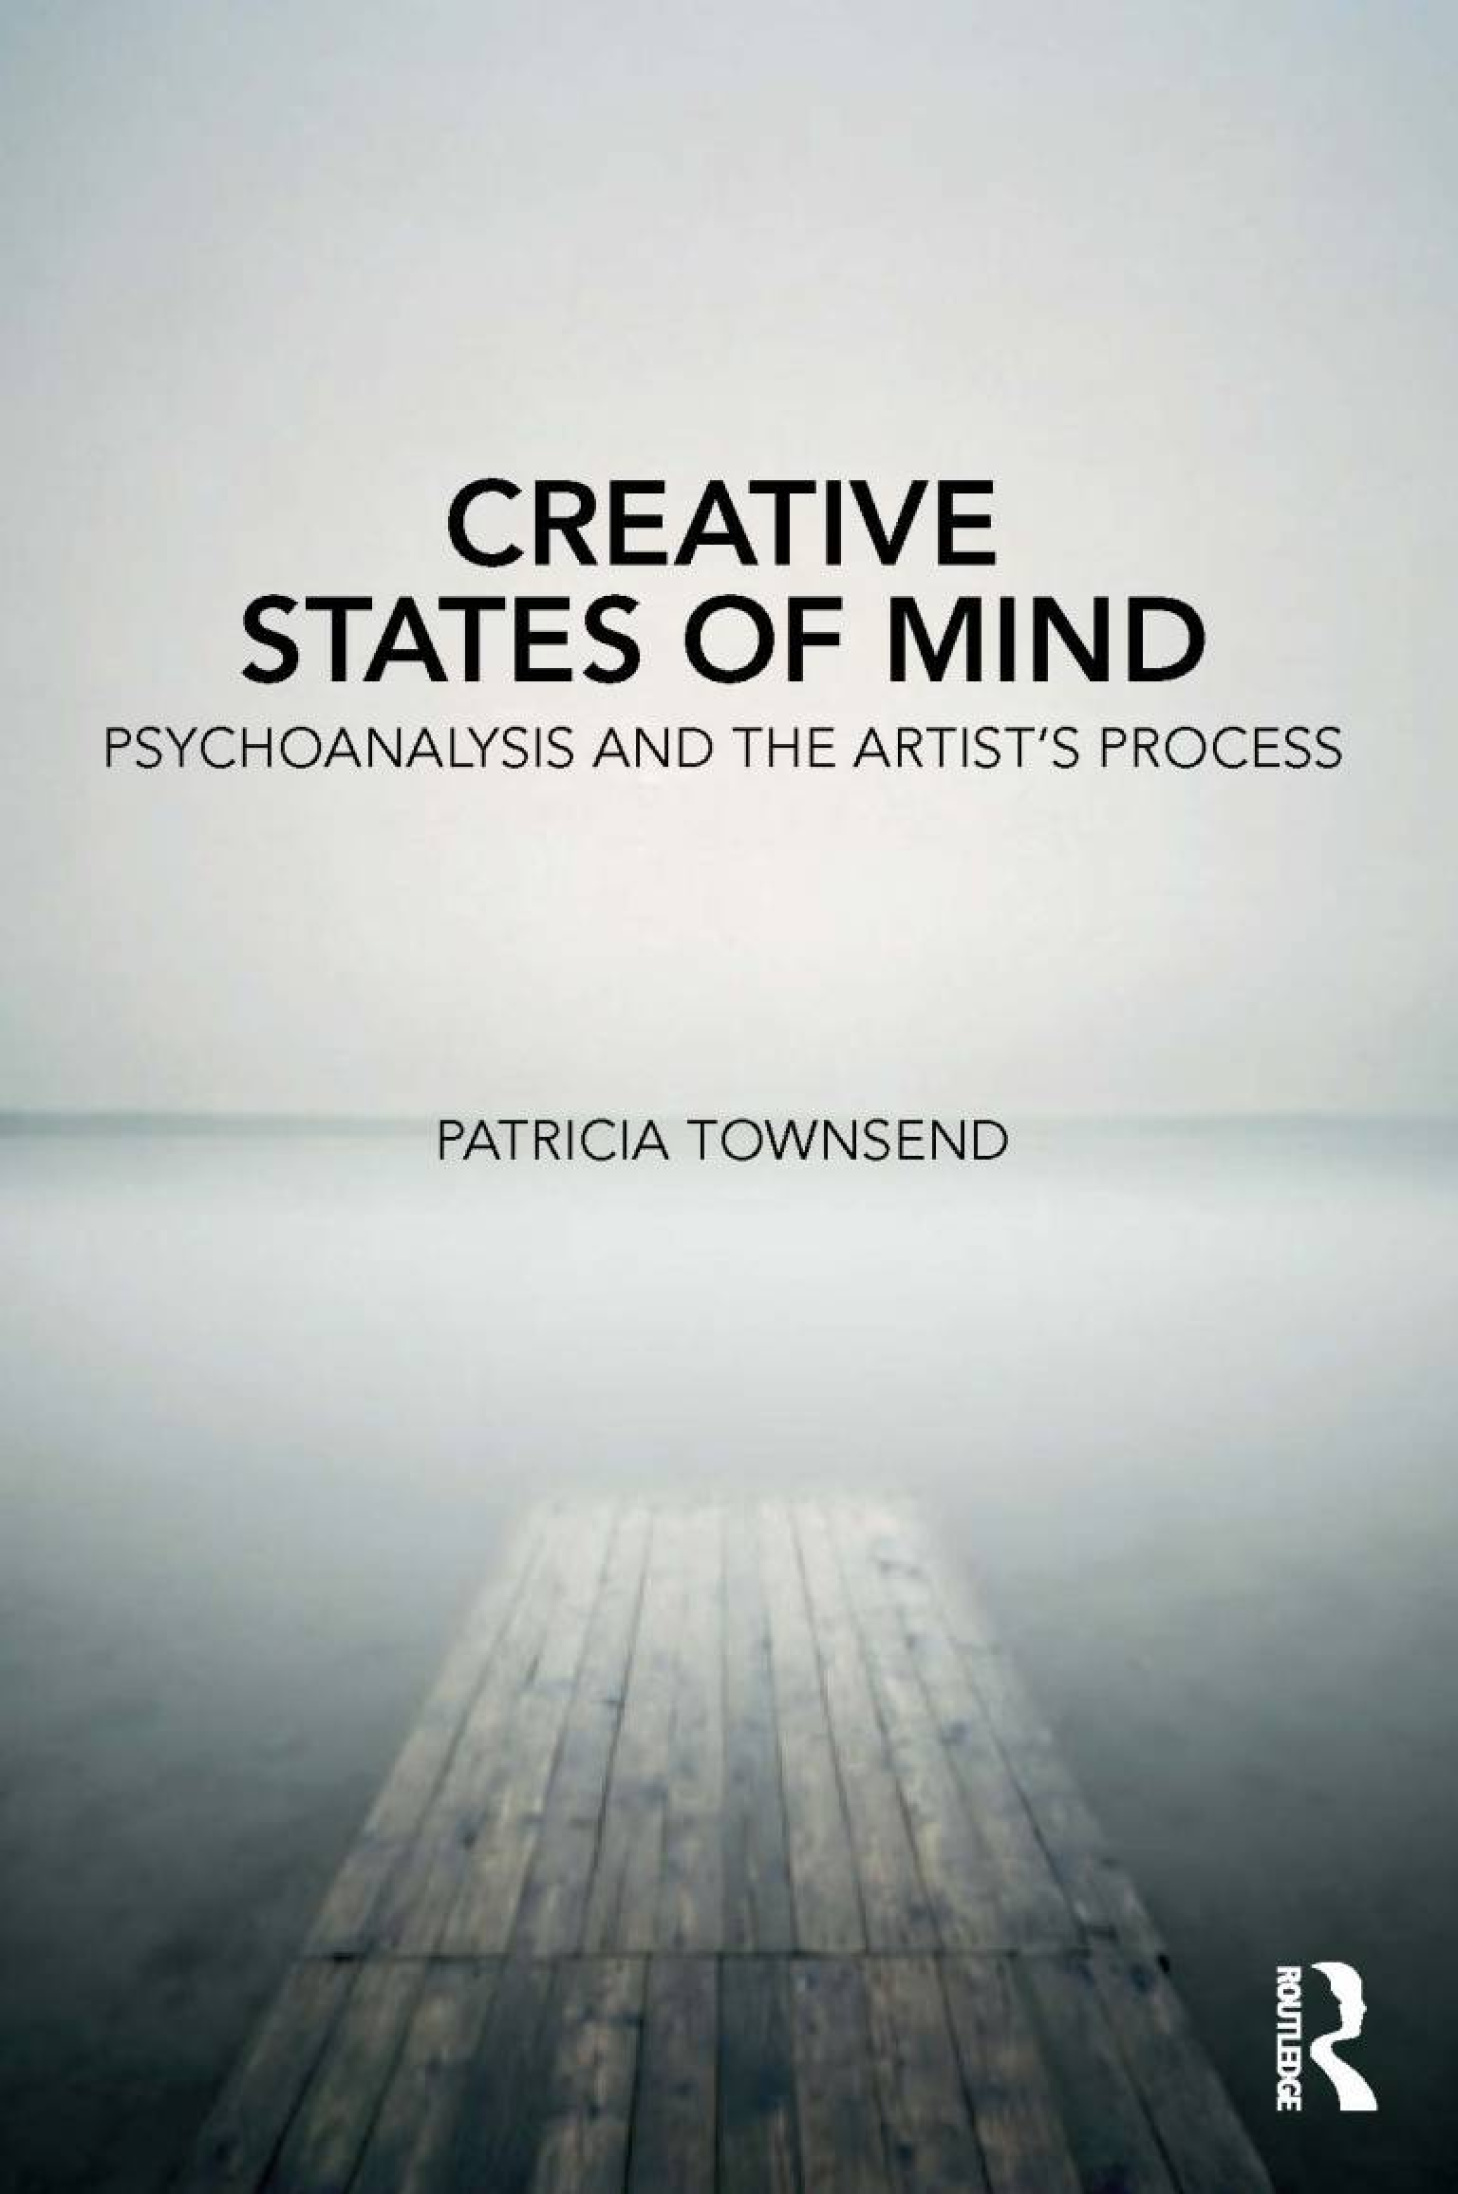 Creative States of Mind: book cover